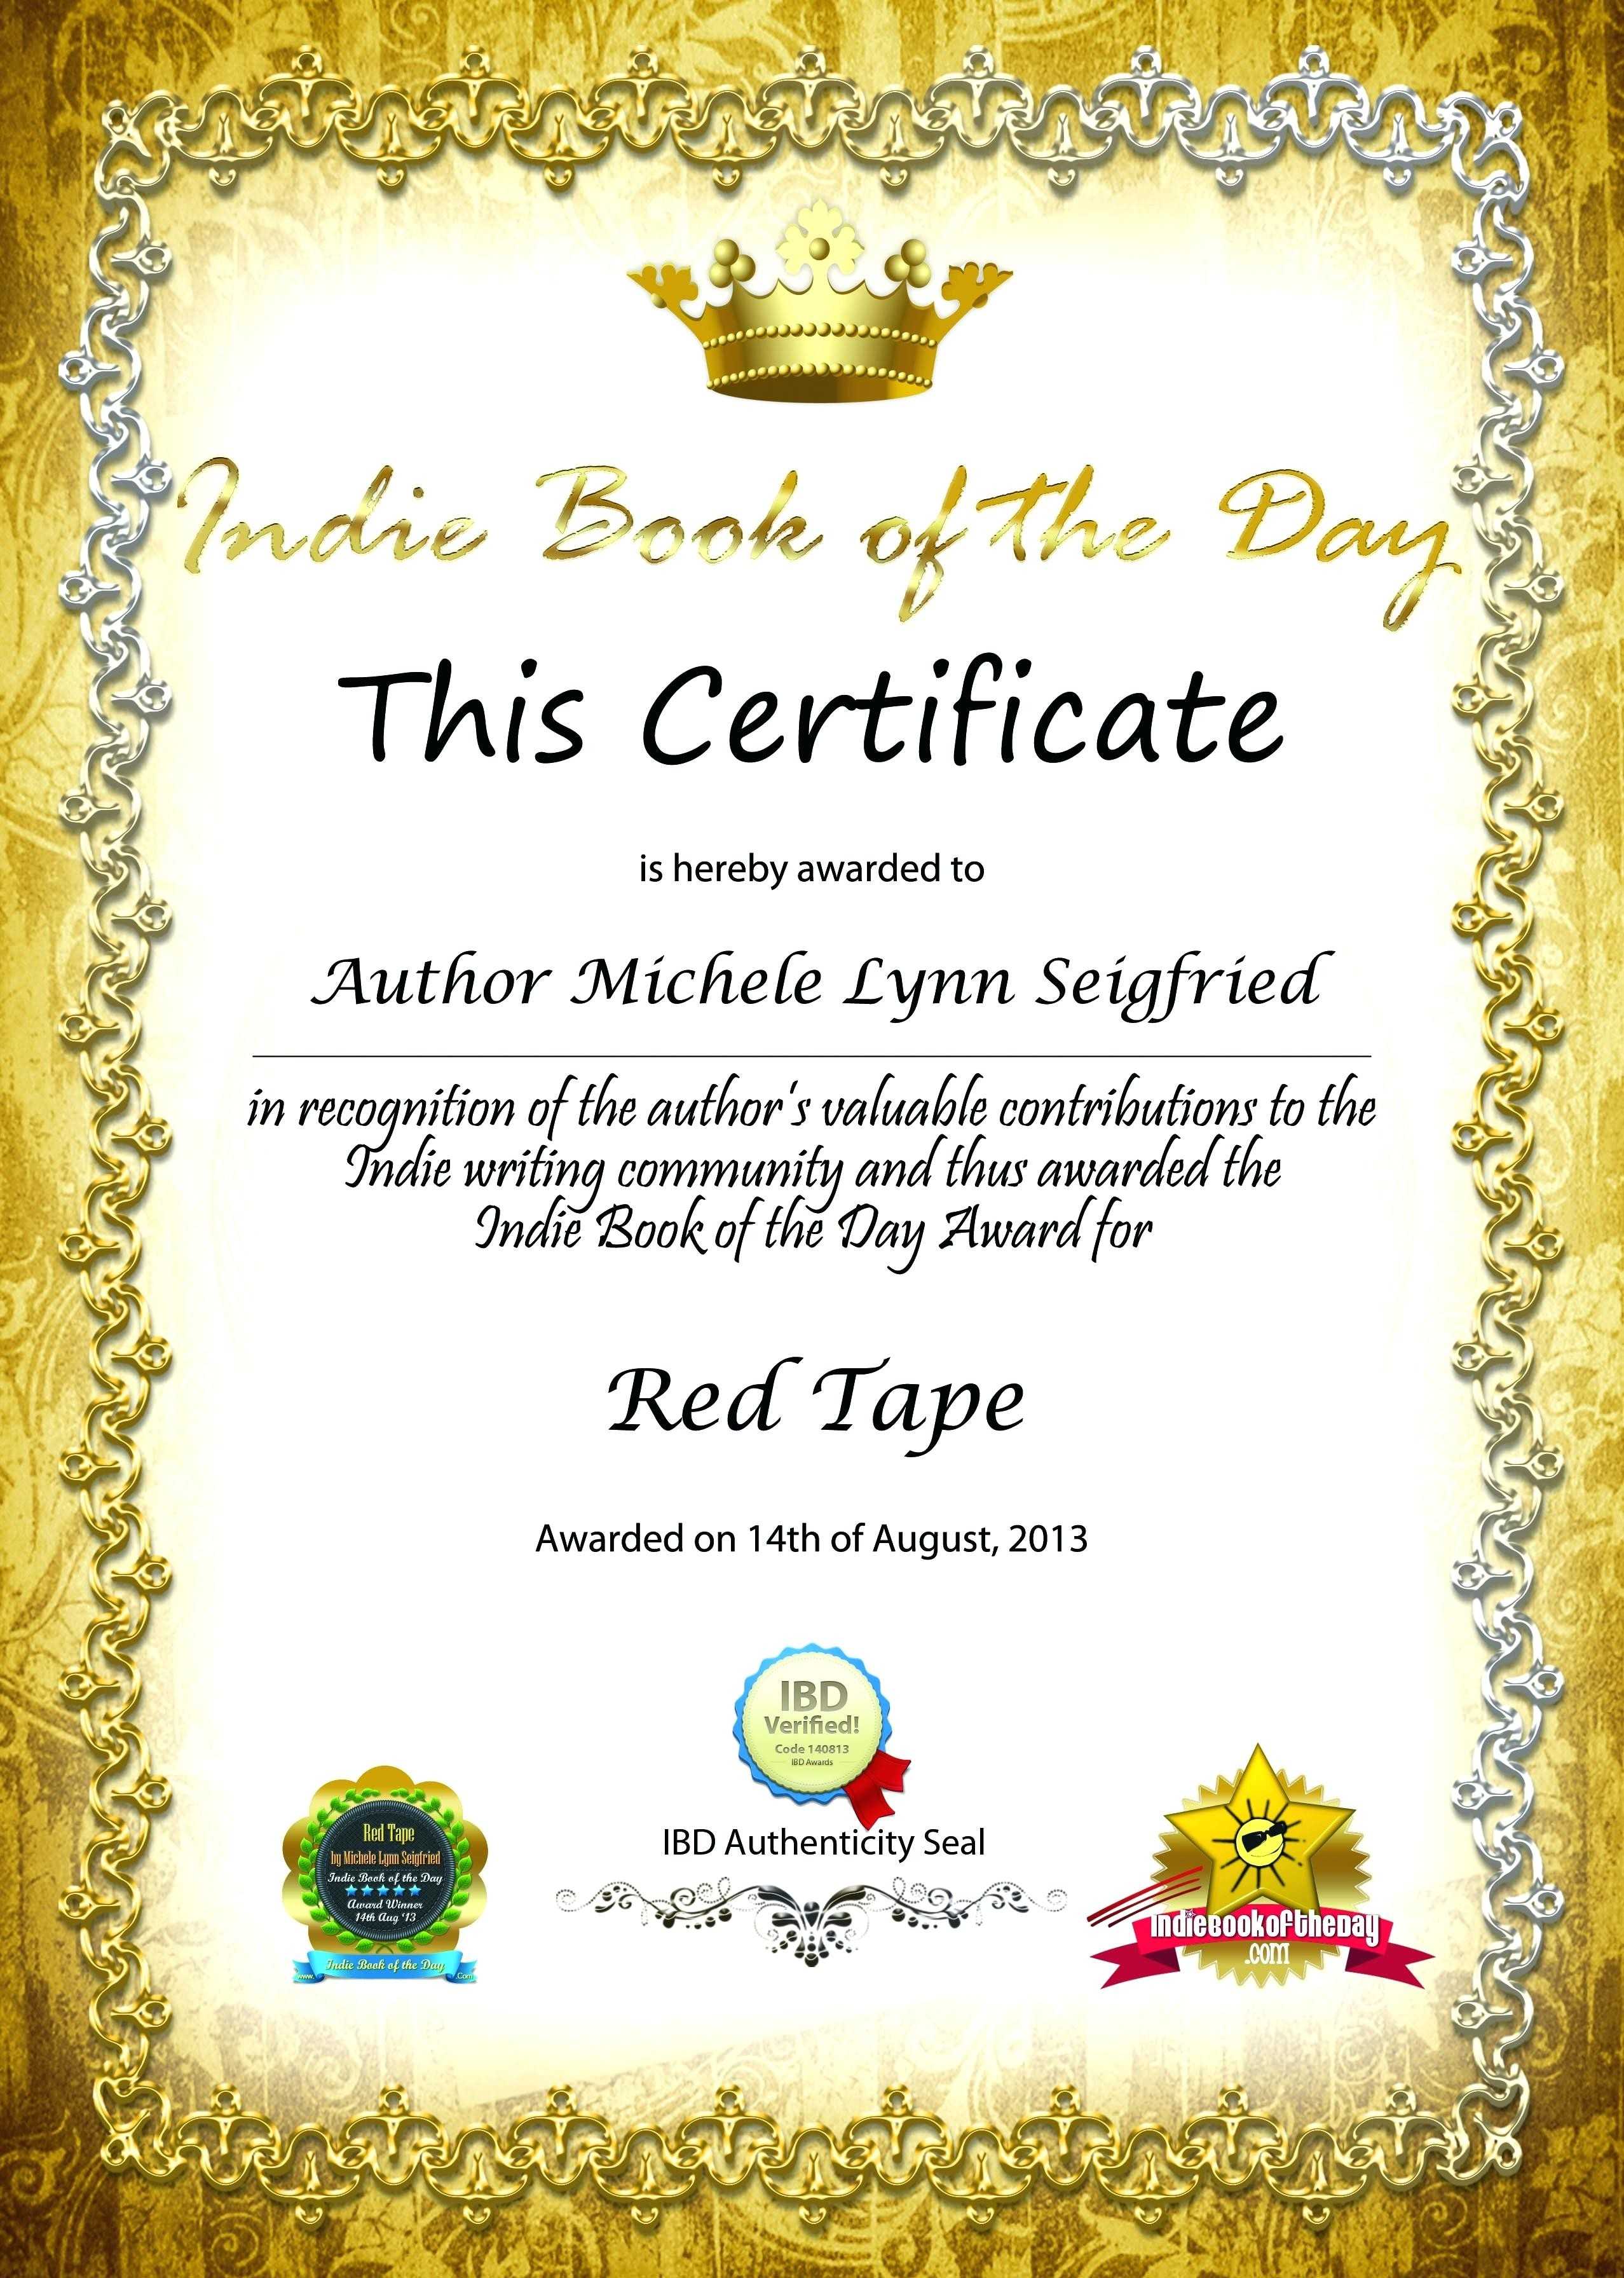 Collection Of Solutions For Spelling Bee Award Certificate Throughout Spelling Bee Award Certificate Template